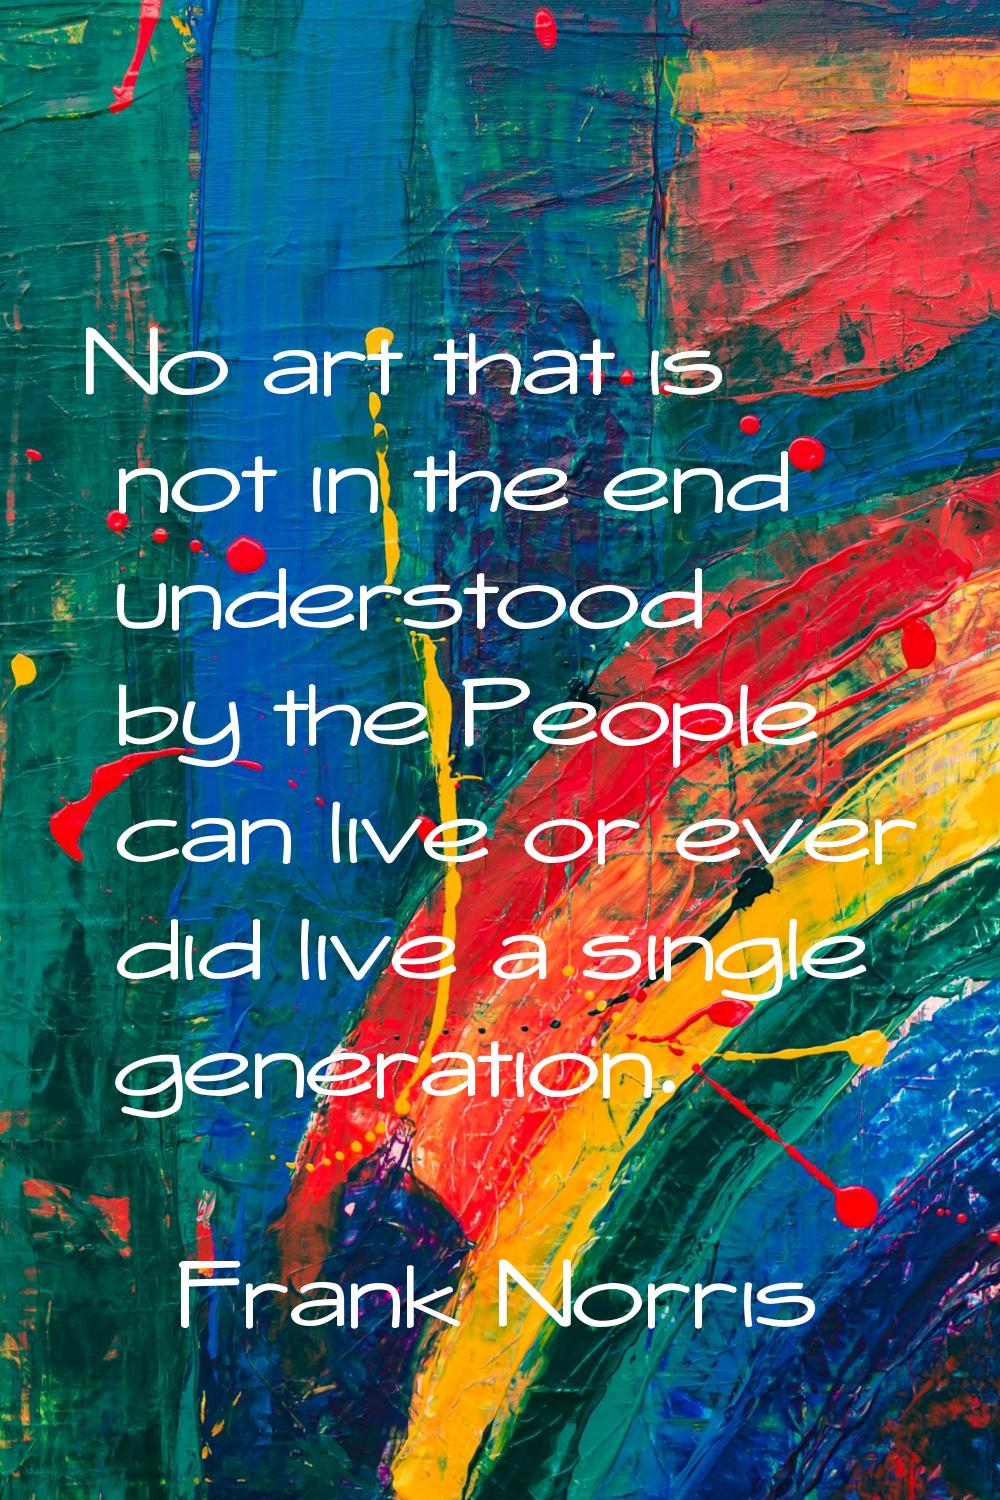 No art that is not in the end understood by the People can live or ever did live a single generatio